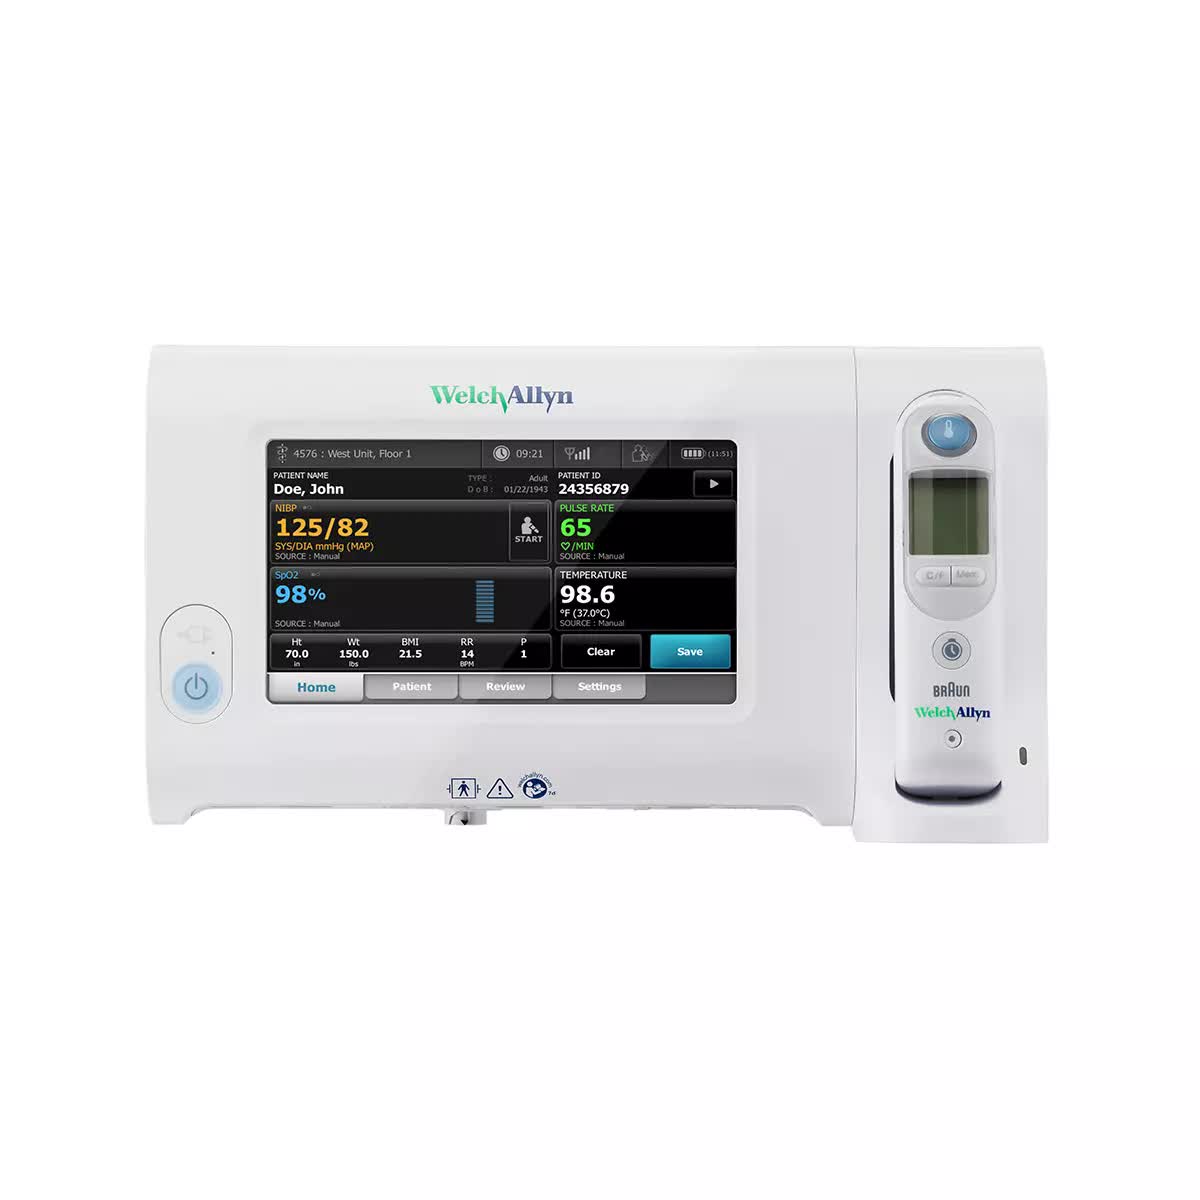 Welch Allyn Connex 7400 Upgradable to WIFI Connectivity Spot Monitor with Nellcor SpO2 and Braun Pro6000